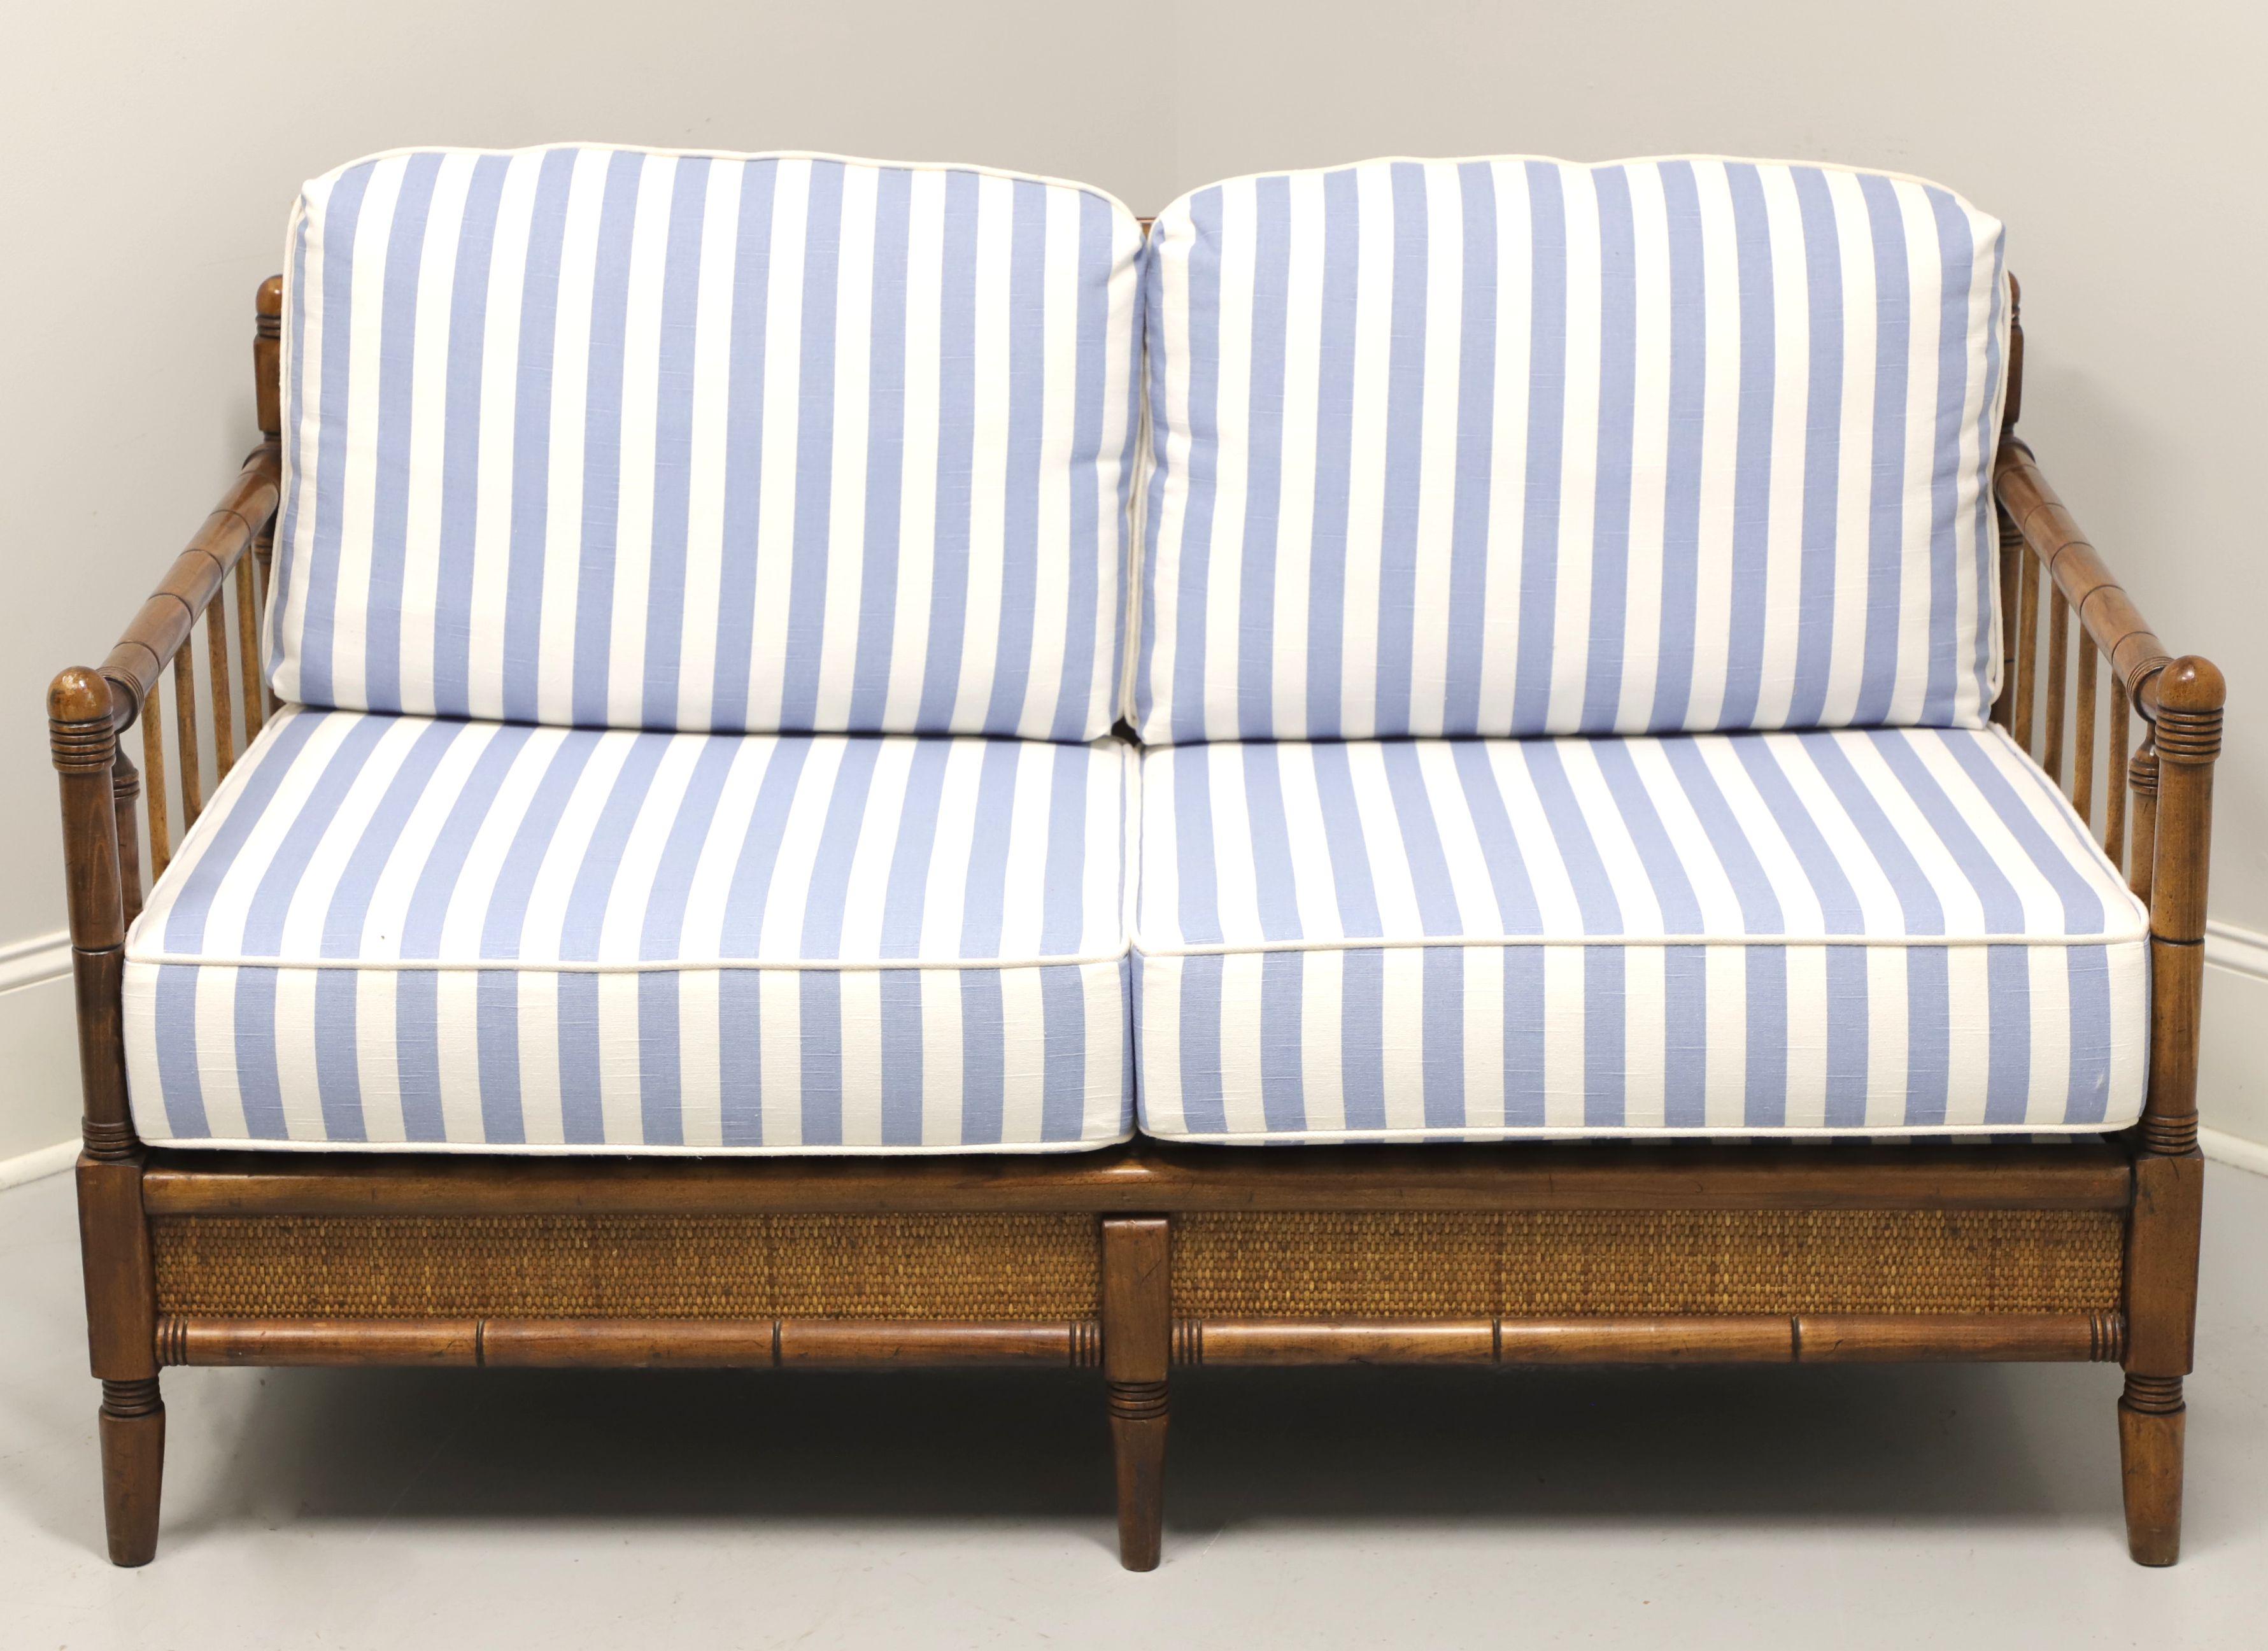 A mid 20th century British Colonial style settee by Broyhill Premier. Faux bamboo hardwood frame, cane trim to apron, rounded slat arms, open slat back, cloth upholstered seat support, light blue & white colored fabric upholstered back & seat